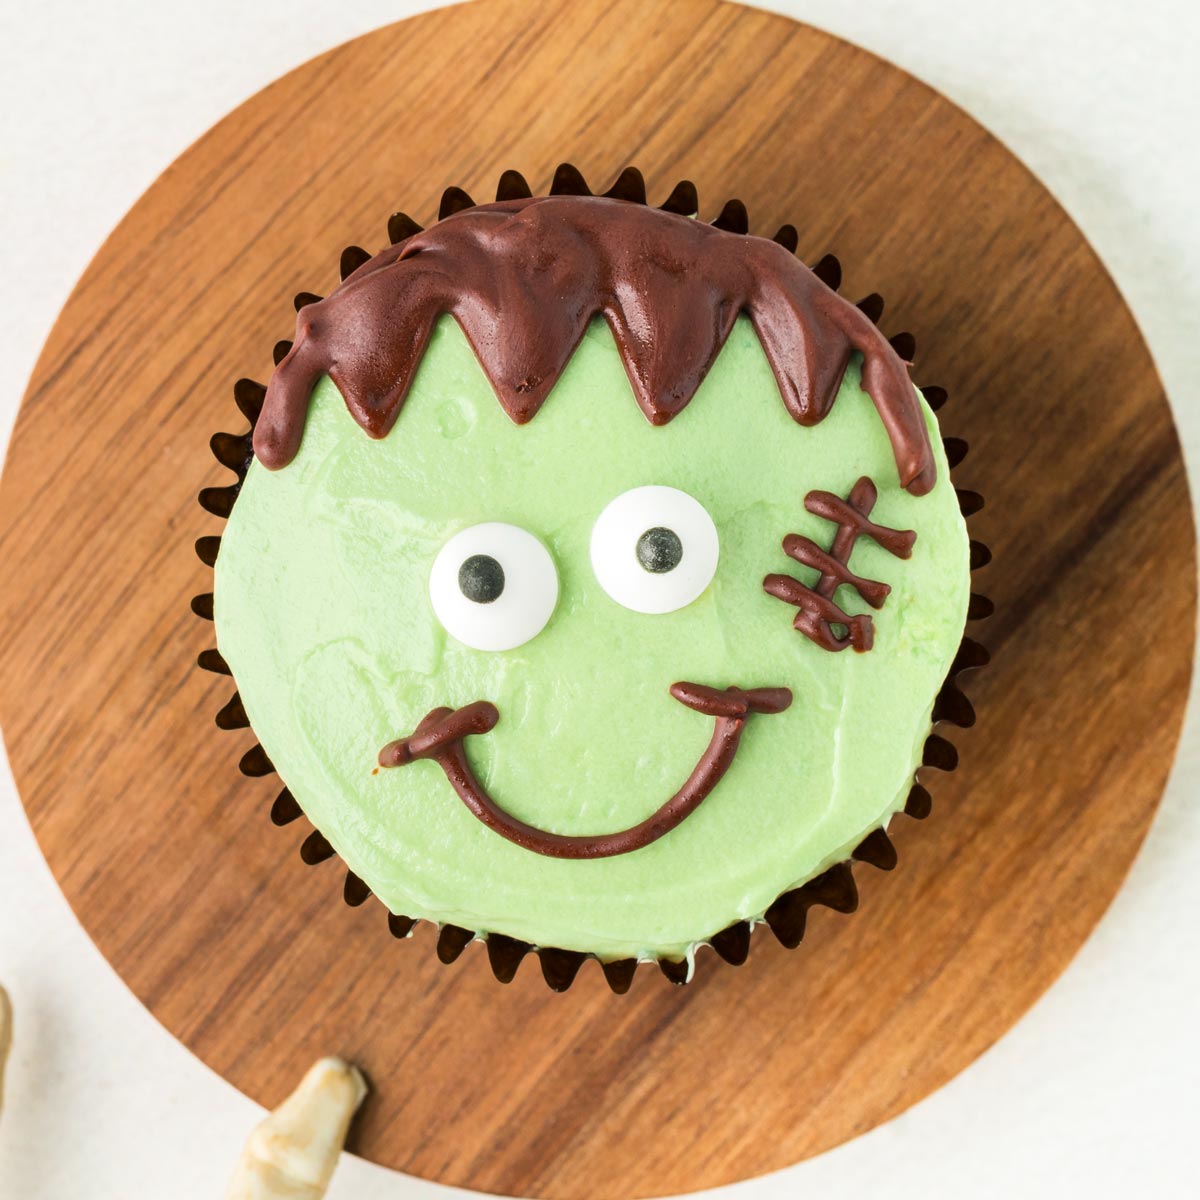 Frankenstein Cupcakes | Easy Wholesome